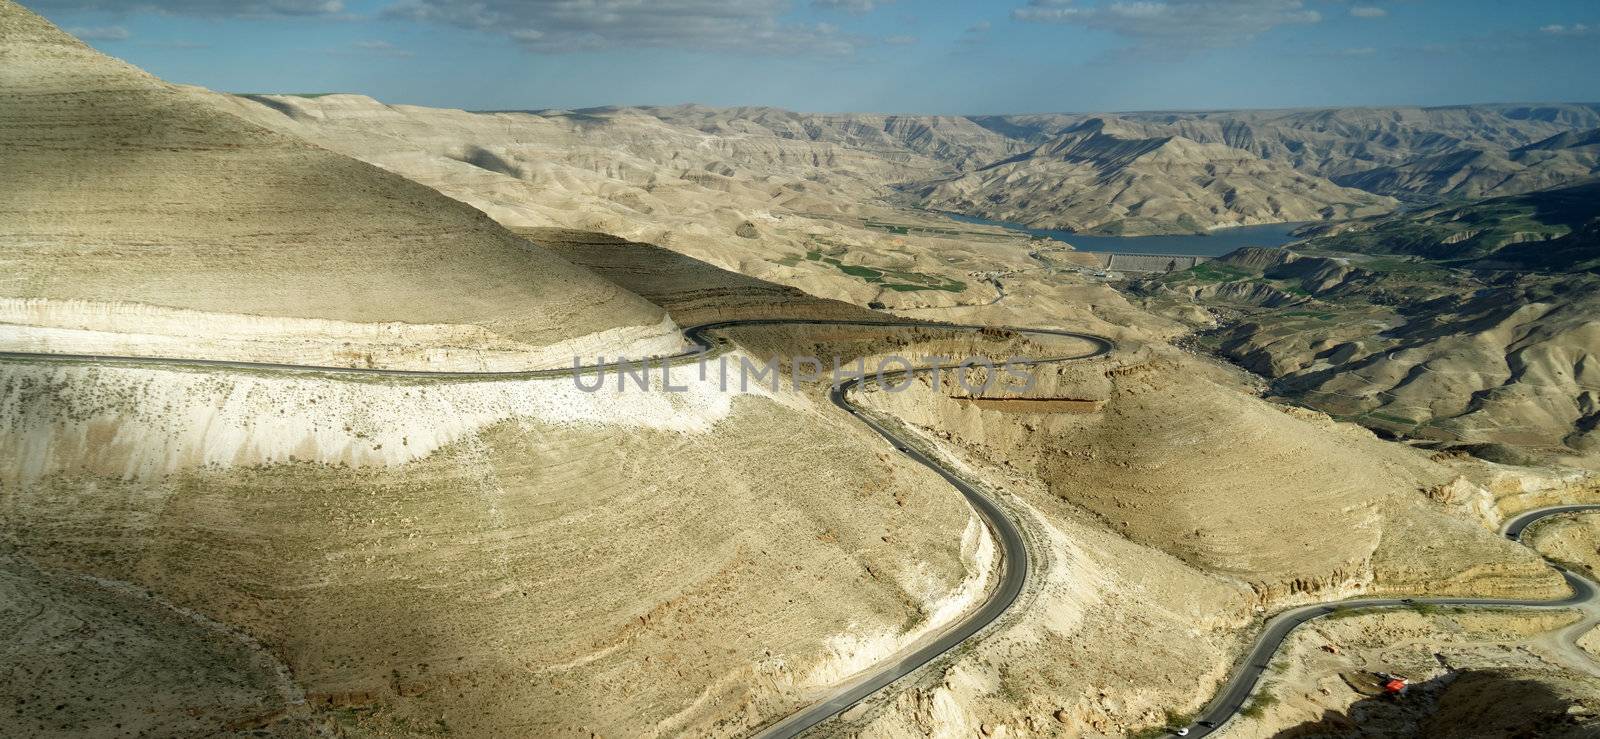 Panoramic view of the King Highway ascending the road north of the Wadi Mujib reservoir in Jordan, middle east